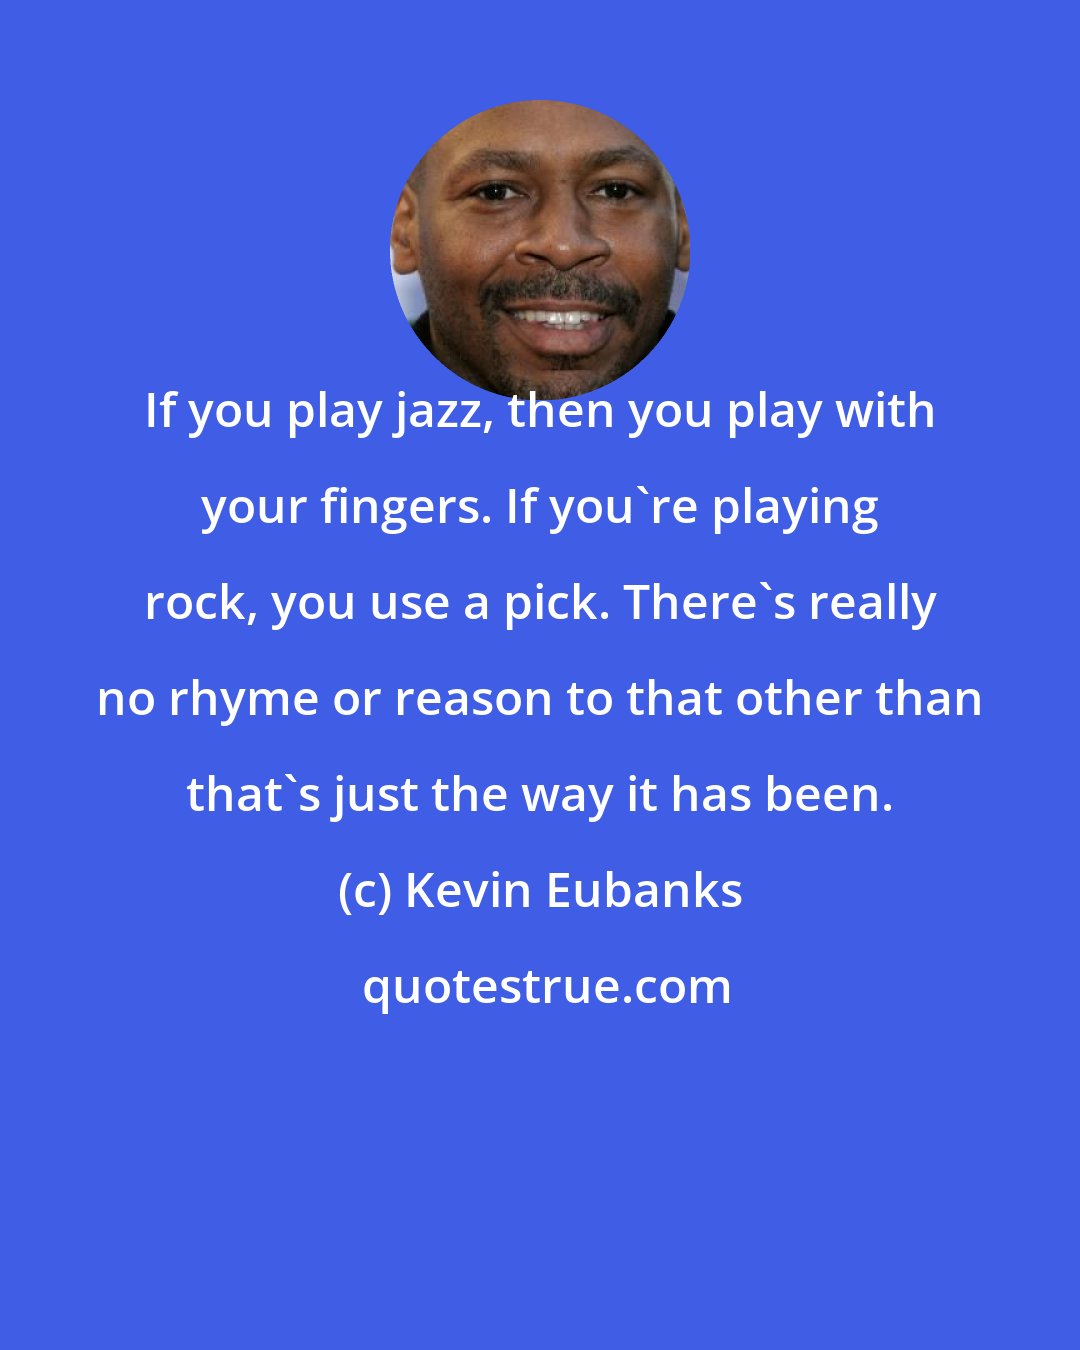 Kevin Eubanks: If you play jazz, then you play with your fingers. If you're playing rock, you use a pick. There's really no rhyme or reason to that other than that's just the way it has been.